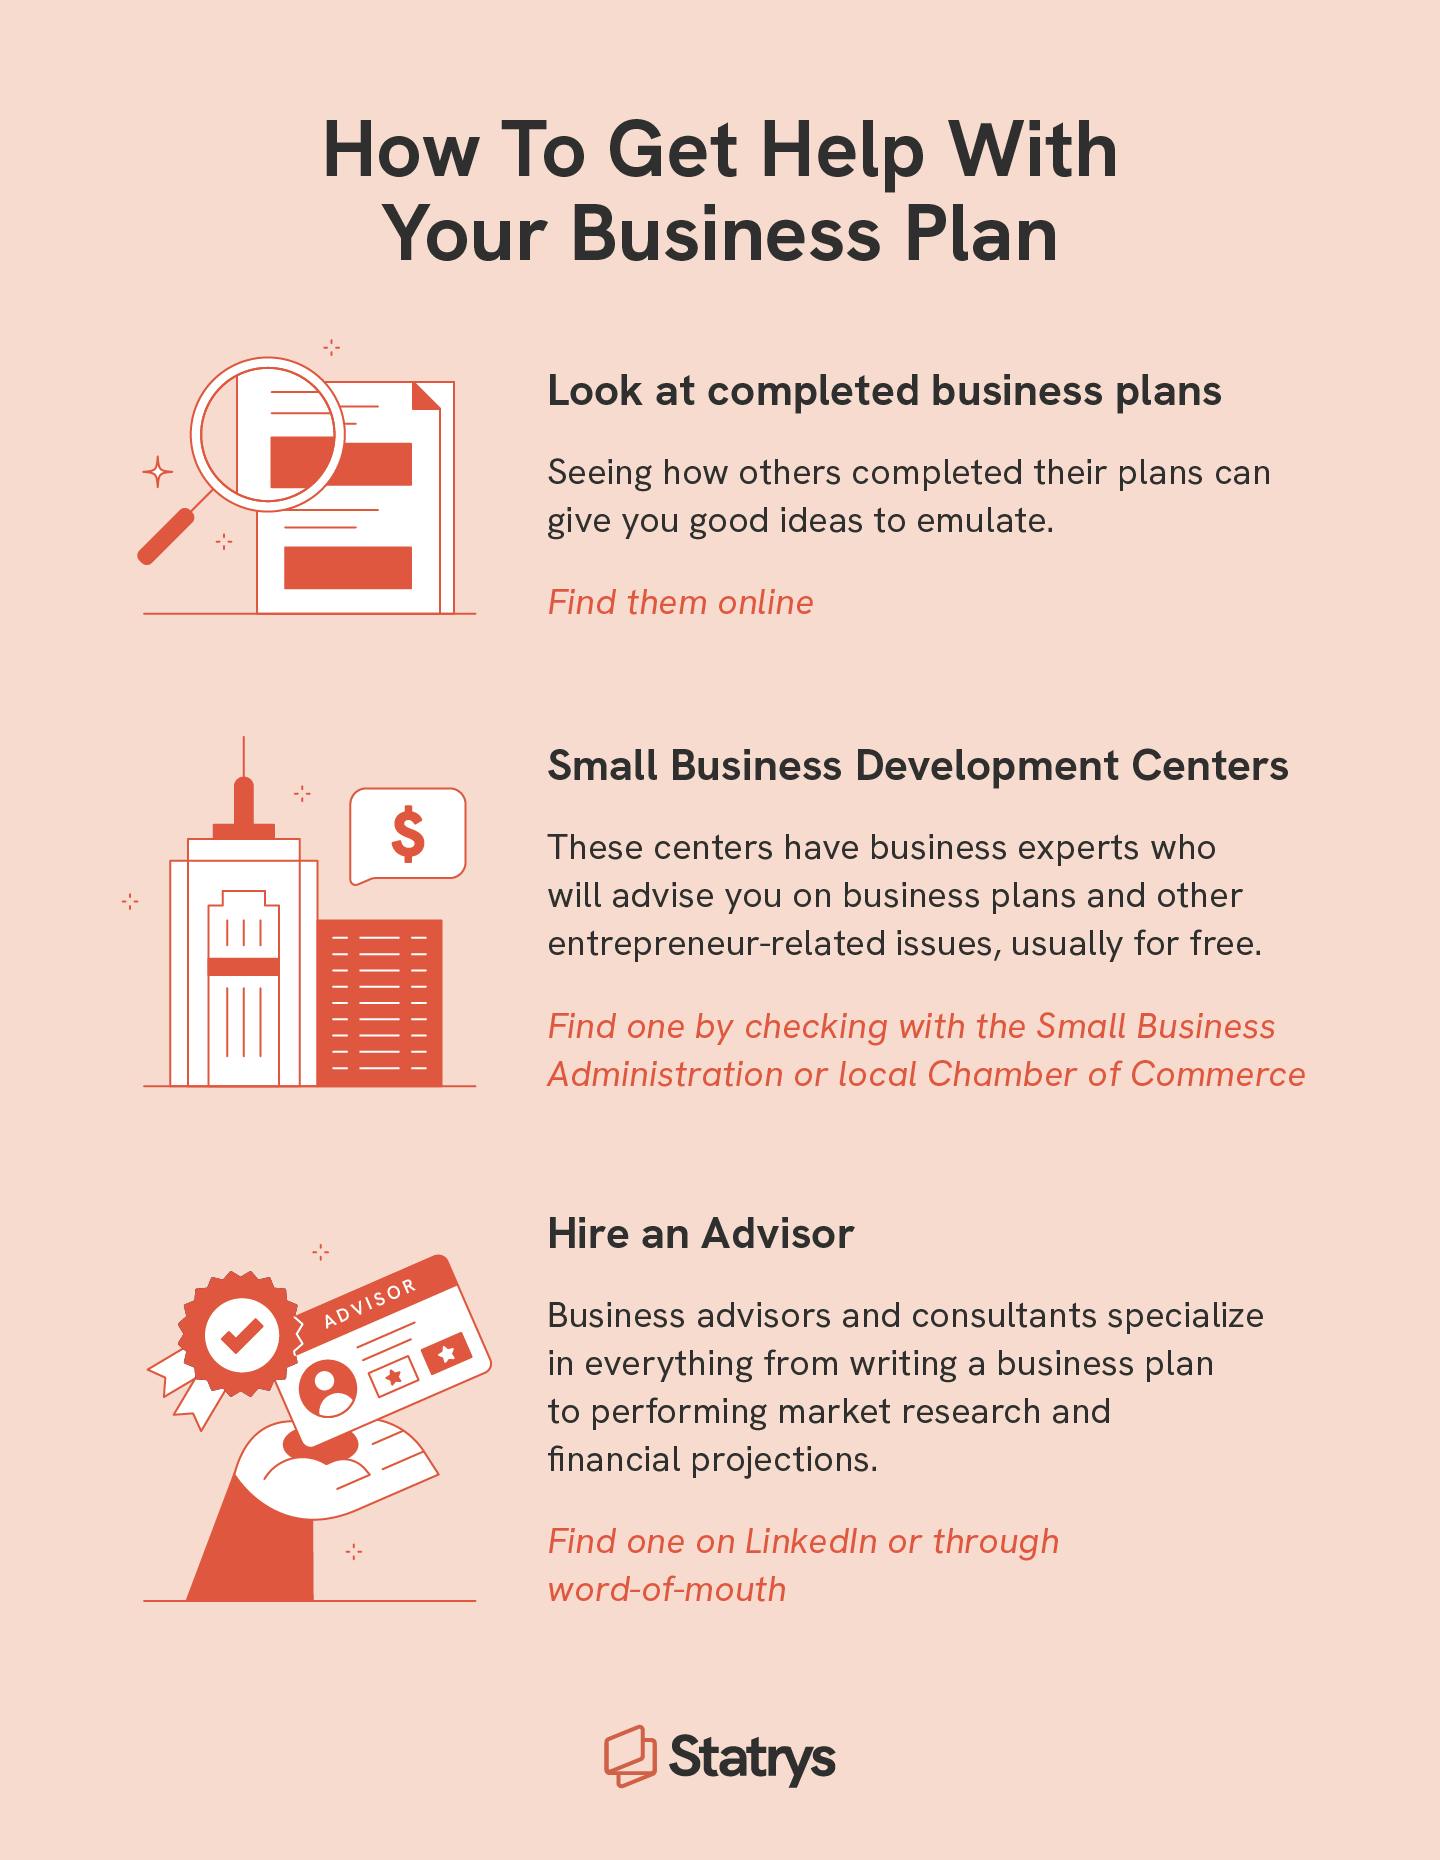 Illustration that provides three ways to get help with a business plan, including looking at completed plans, hiring an advisor, and reaching out to small business development centers.